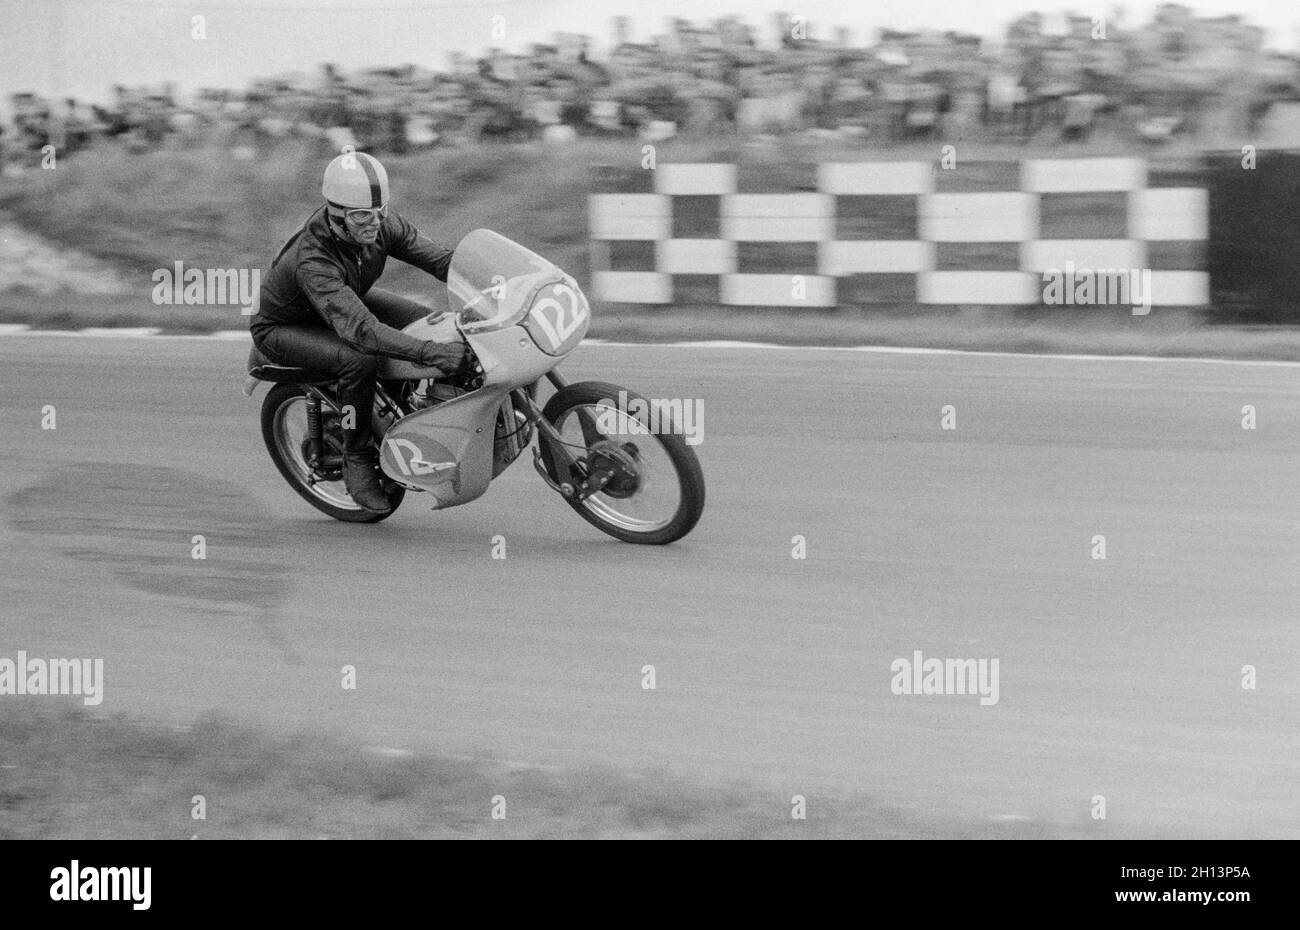 A vintage black and white photograph taken at Brands Hatch Race Circuit in England in 1961. Richard Wyler driving a Greeves Motorcycle. Stock Photo